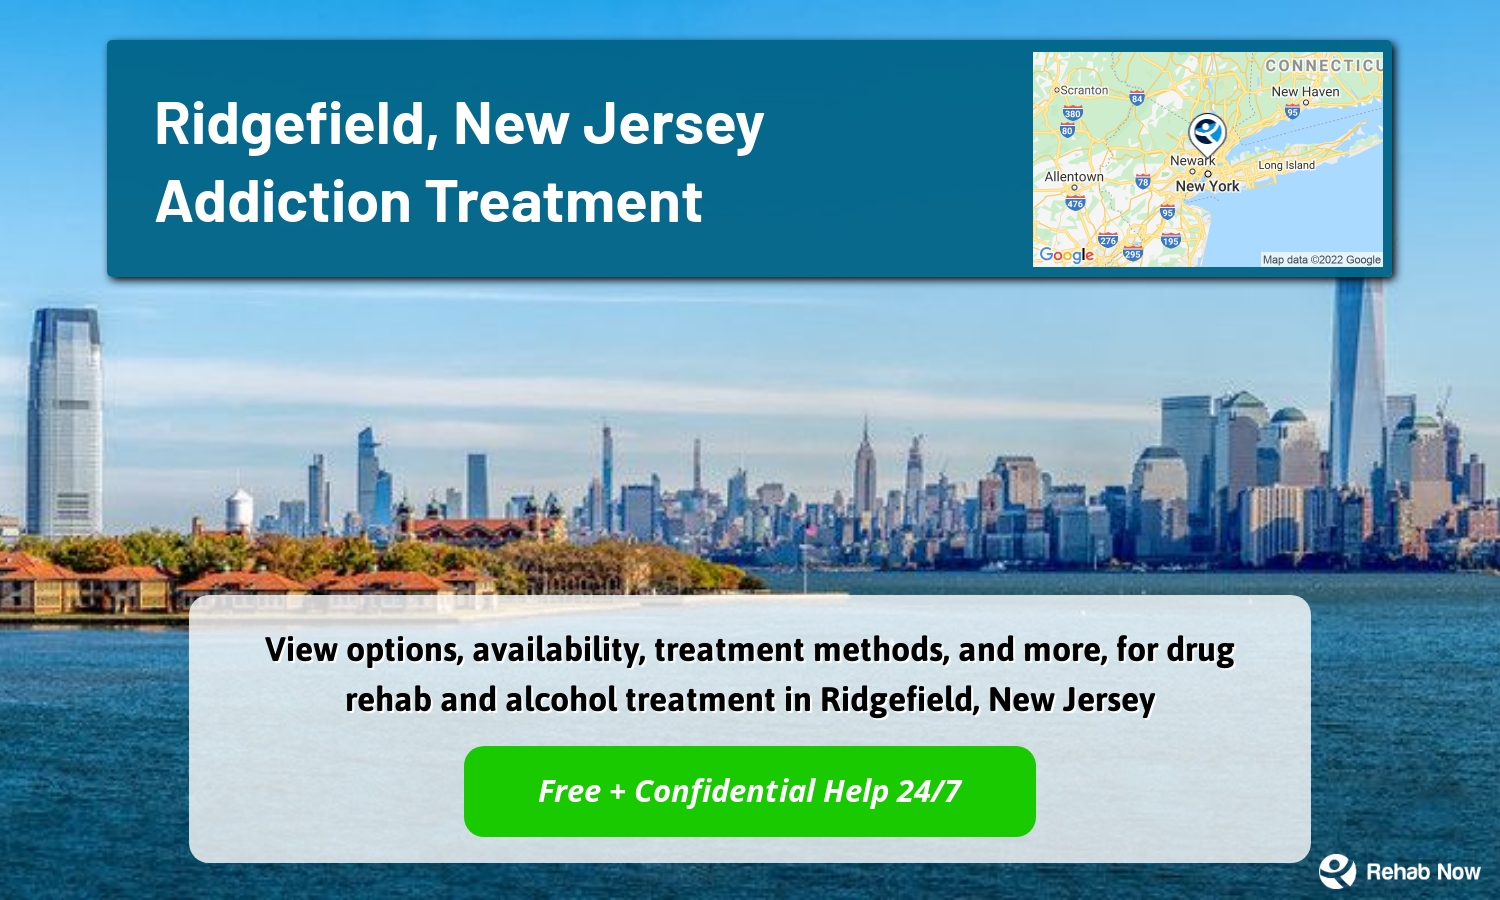 View options, availability, treatment methods, and more, for drug rehab and alcohol treatment in Ridgefield, New Jersey